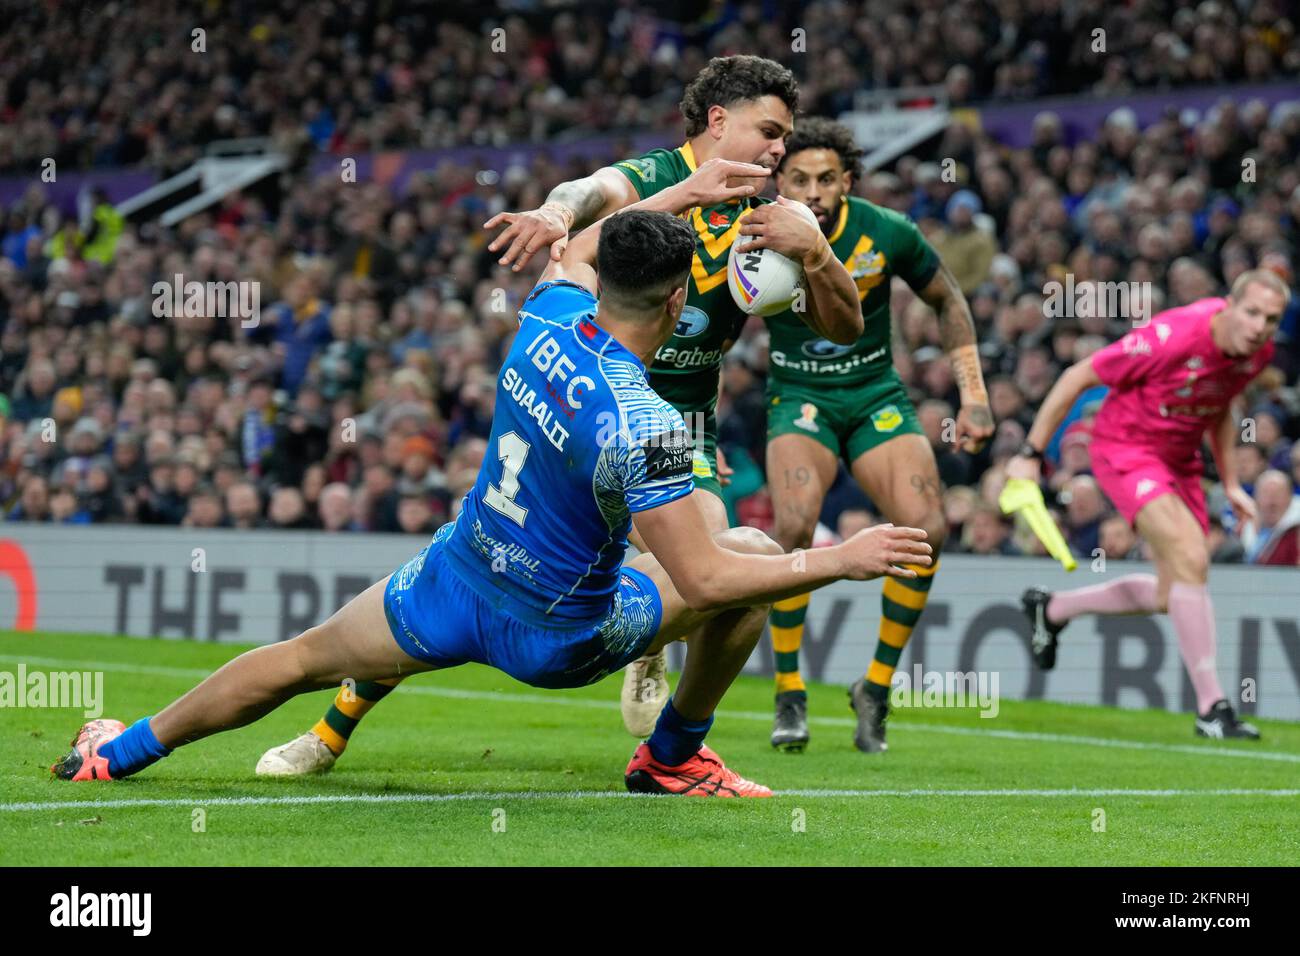 Manchester, UK. 18th Nov, 2022. Keeley Davis of Australia (8) scores the opening try during the 2021 Rugby League World Cup Final 2021 match between Australia and Samoa at Old Trafford, Manchester, England on 19 November 2022. Photo by David Horn. Credit: PRiME Media Images/Alamy Live News Stock Photo